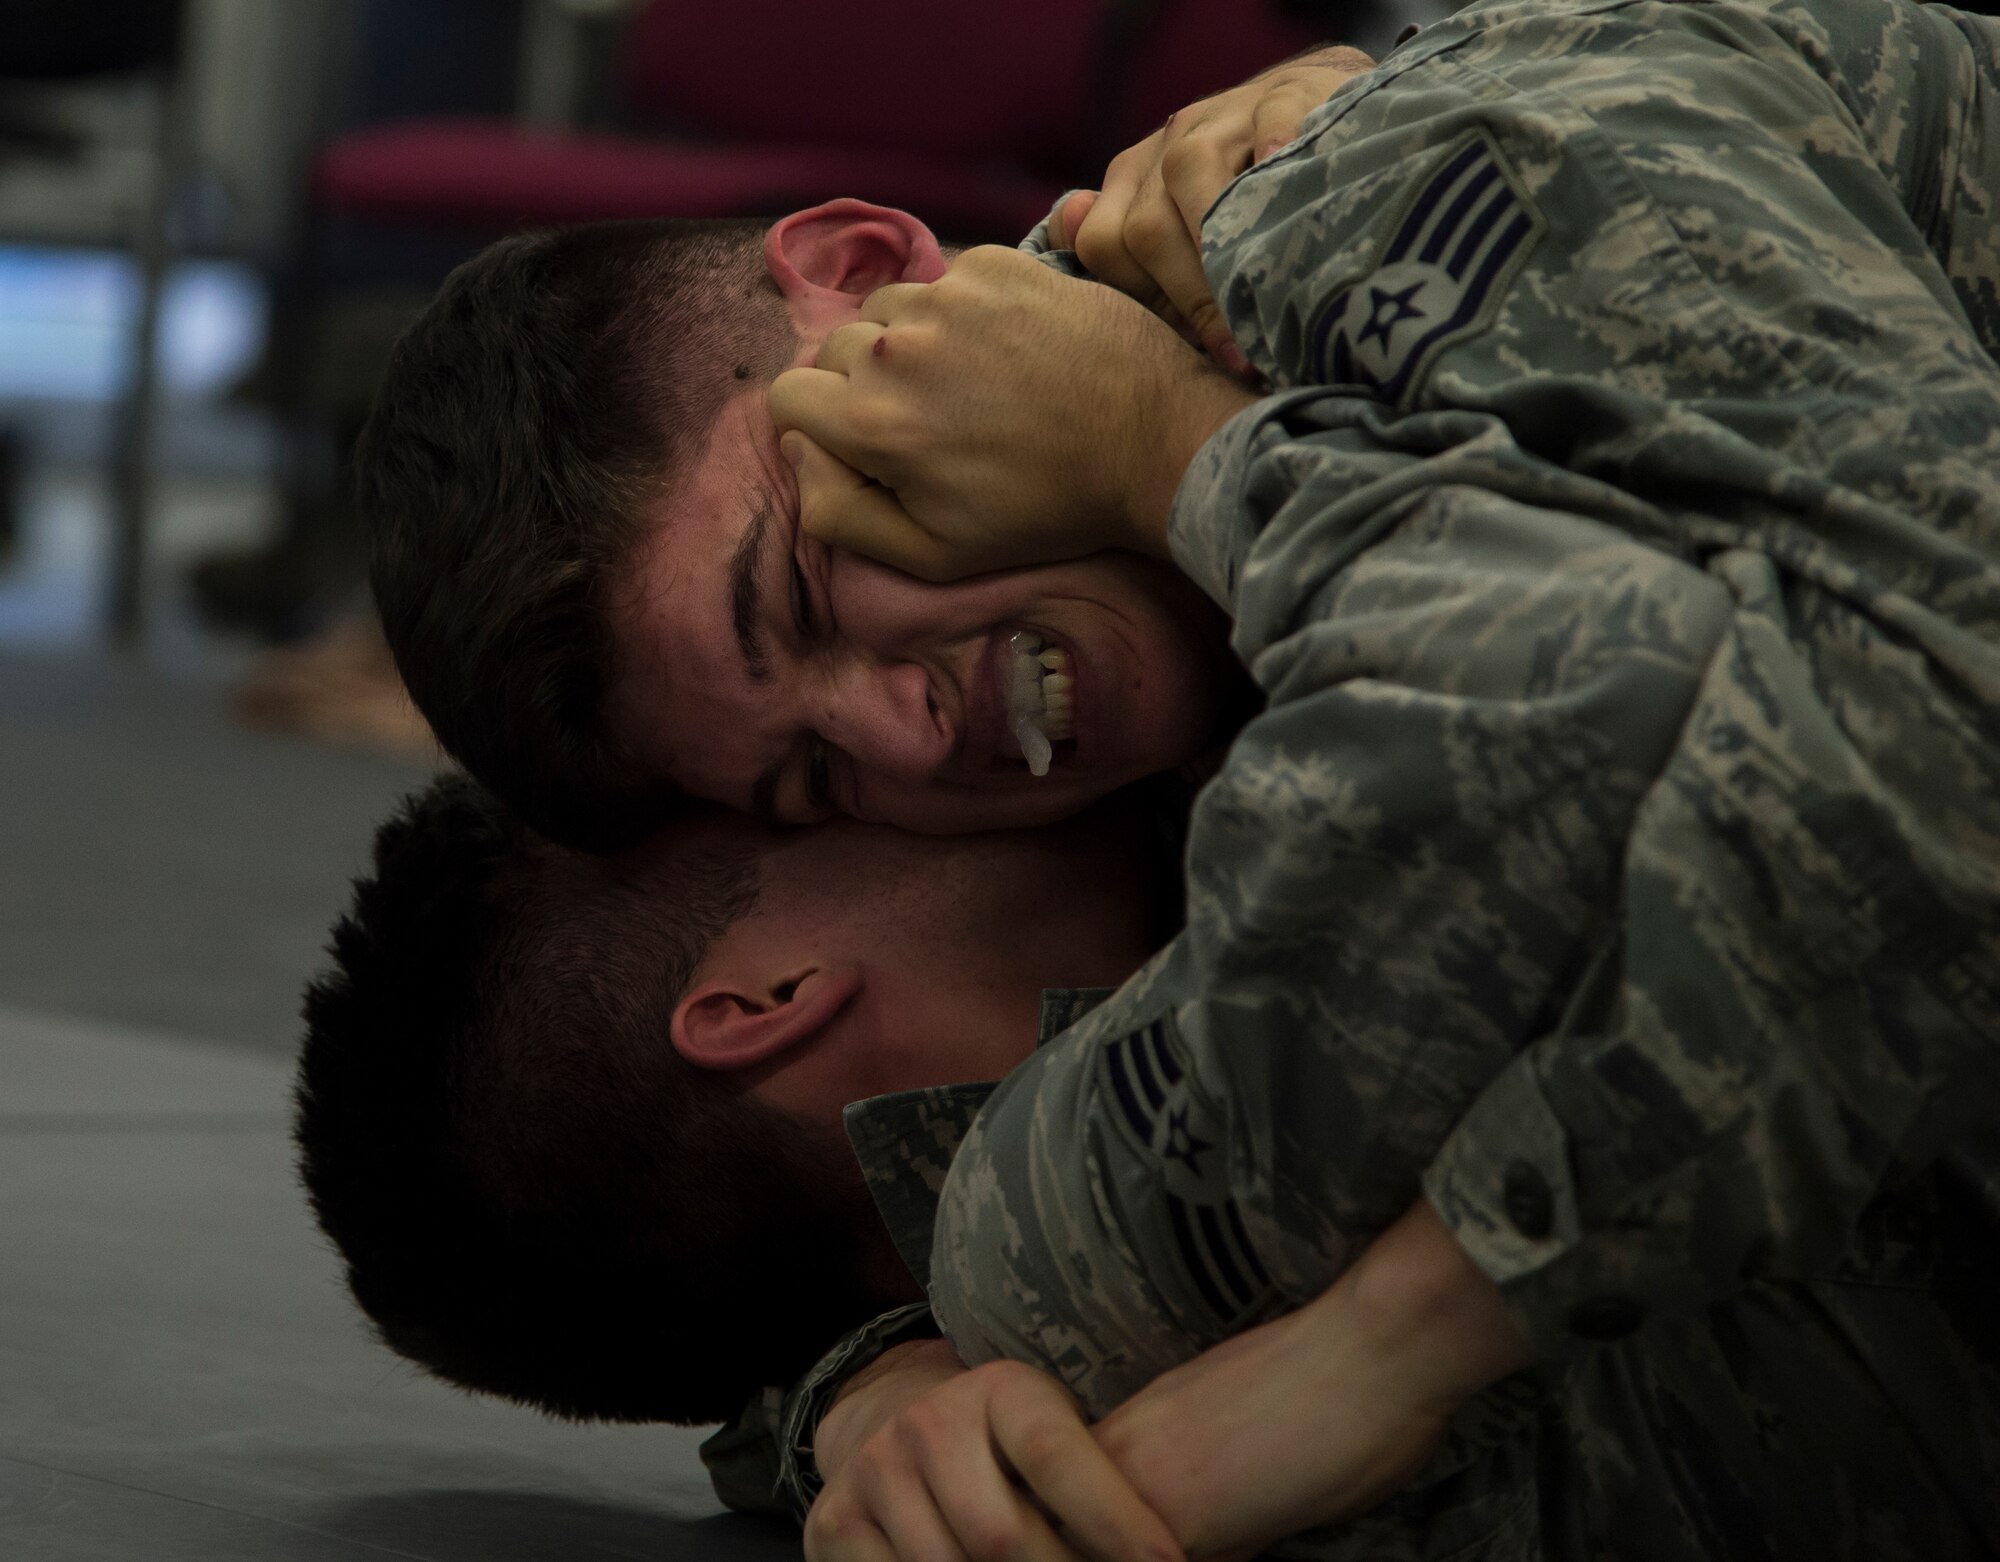 Staff Sgt. Jose Ruiz, 435th Security Forces Squadron patrolman, spars with Senior Airman George Henry III, 423rd SFS patrolman from RAF Alconbury, United Kingdom, during a Security Forces combative course Jan. 14, 2016, at Ramstein Air Base, Germany. The course is designed to help defenders gain the skills, knowledge and confidence they need in order to protect and serve. (U.S. Air Force photo/Senior Airman Jonathan Stefanko)